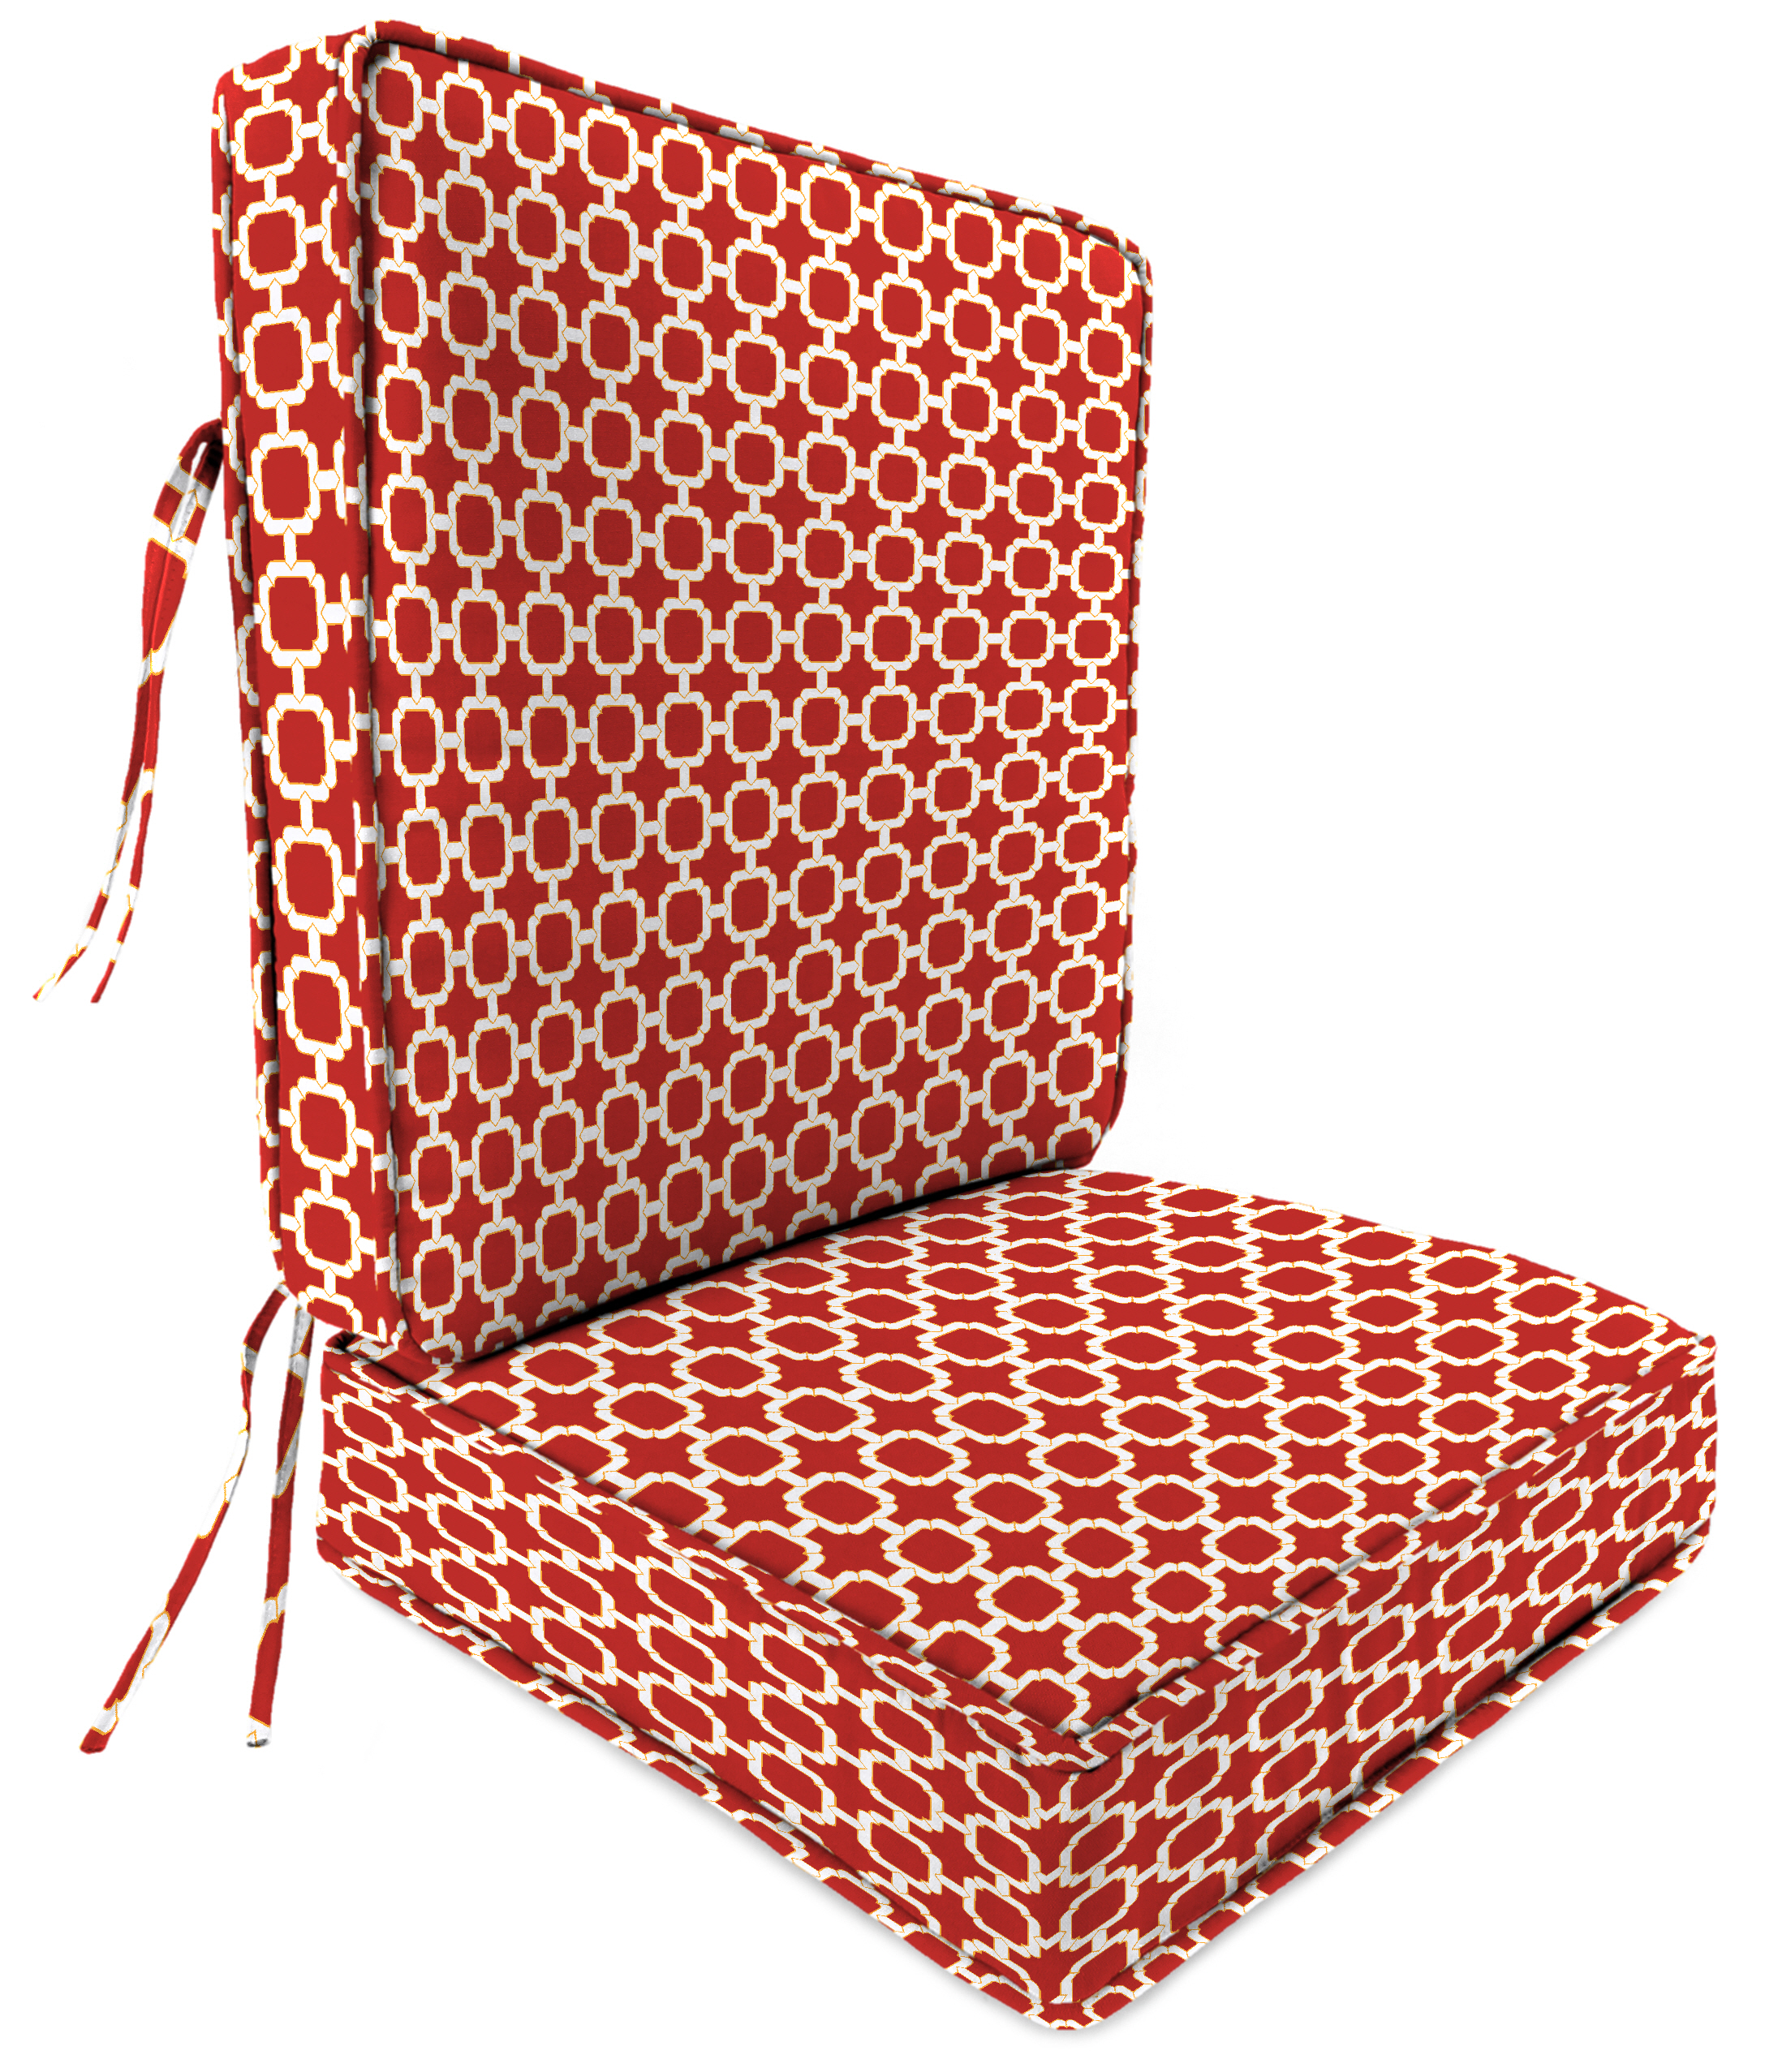 Patio Deep Seat Patio Chair Cushion in Hockley Red